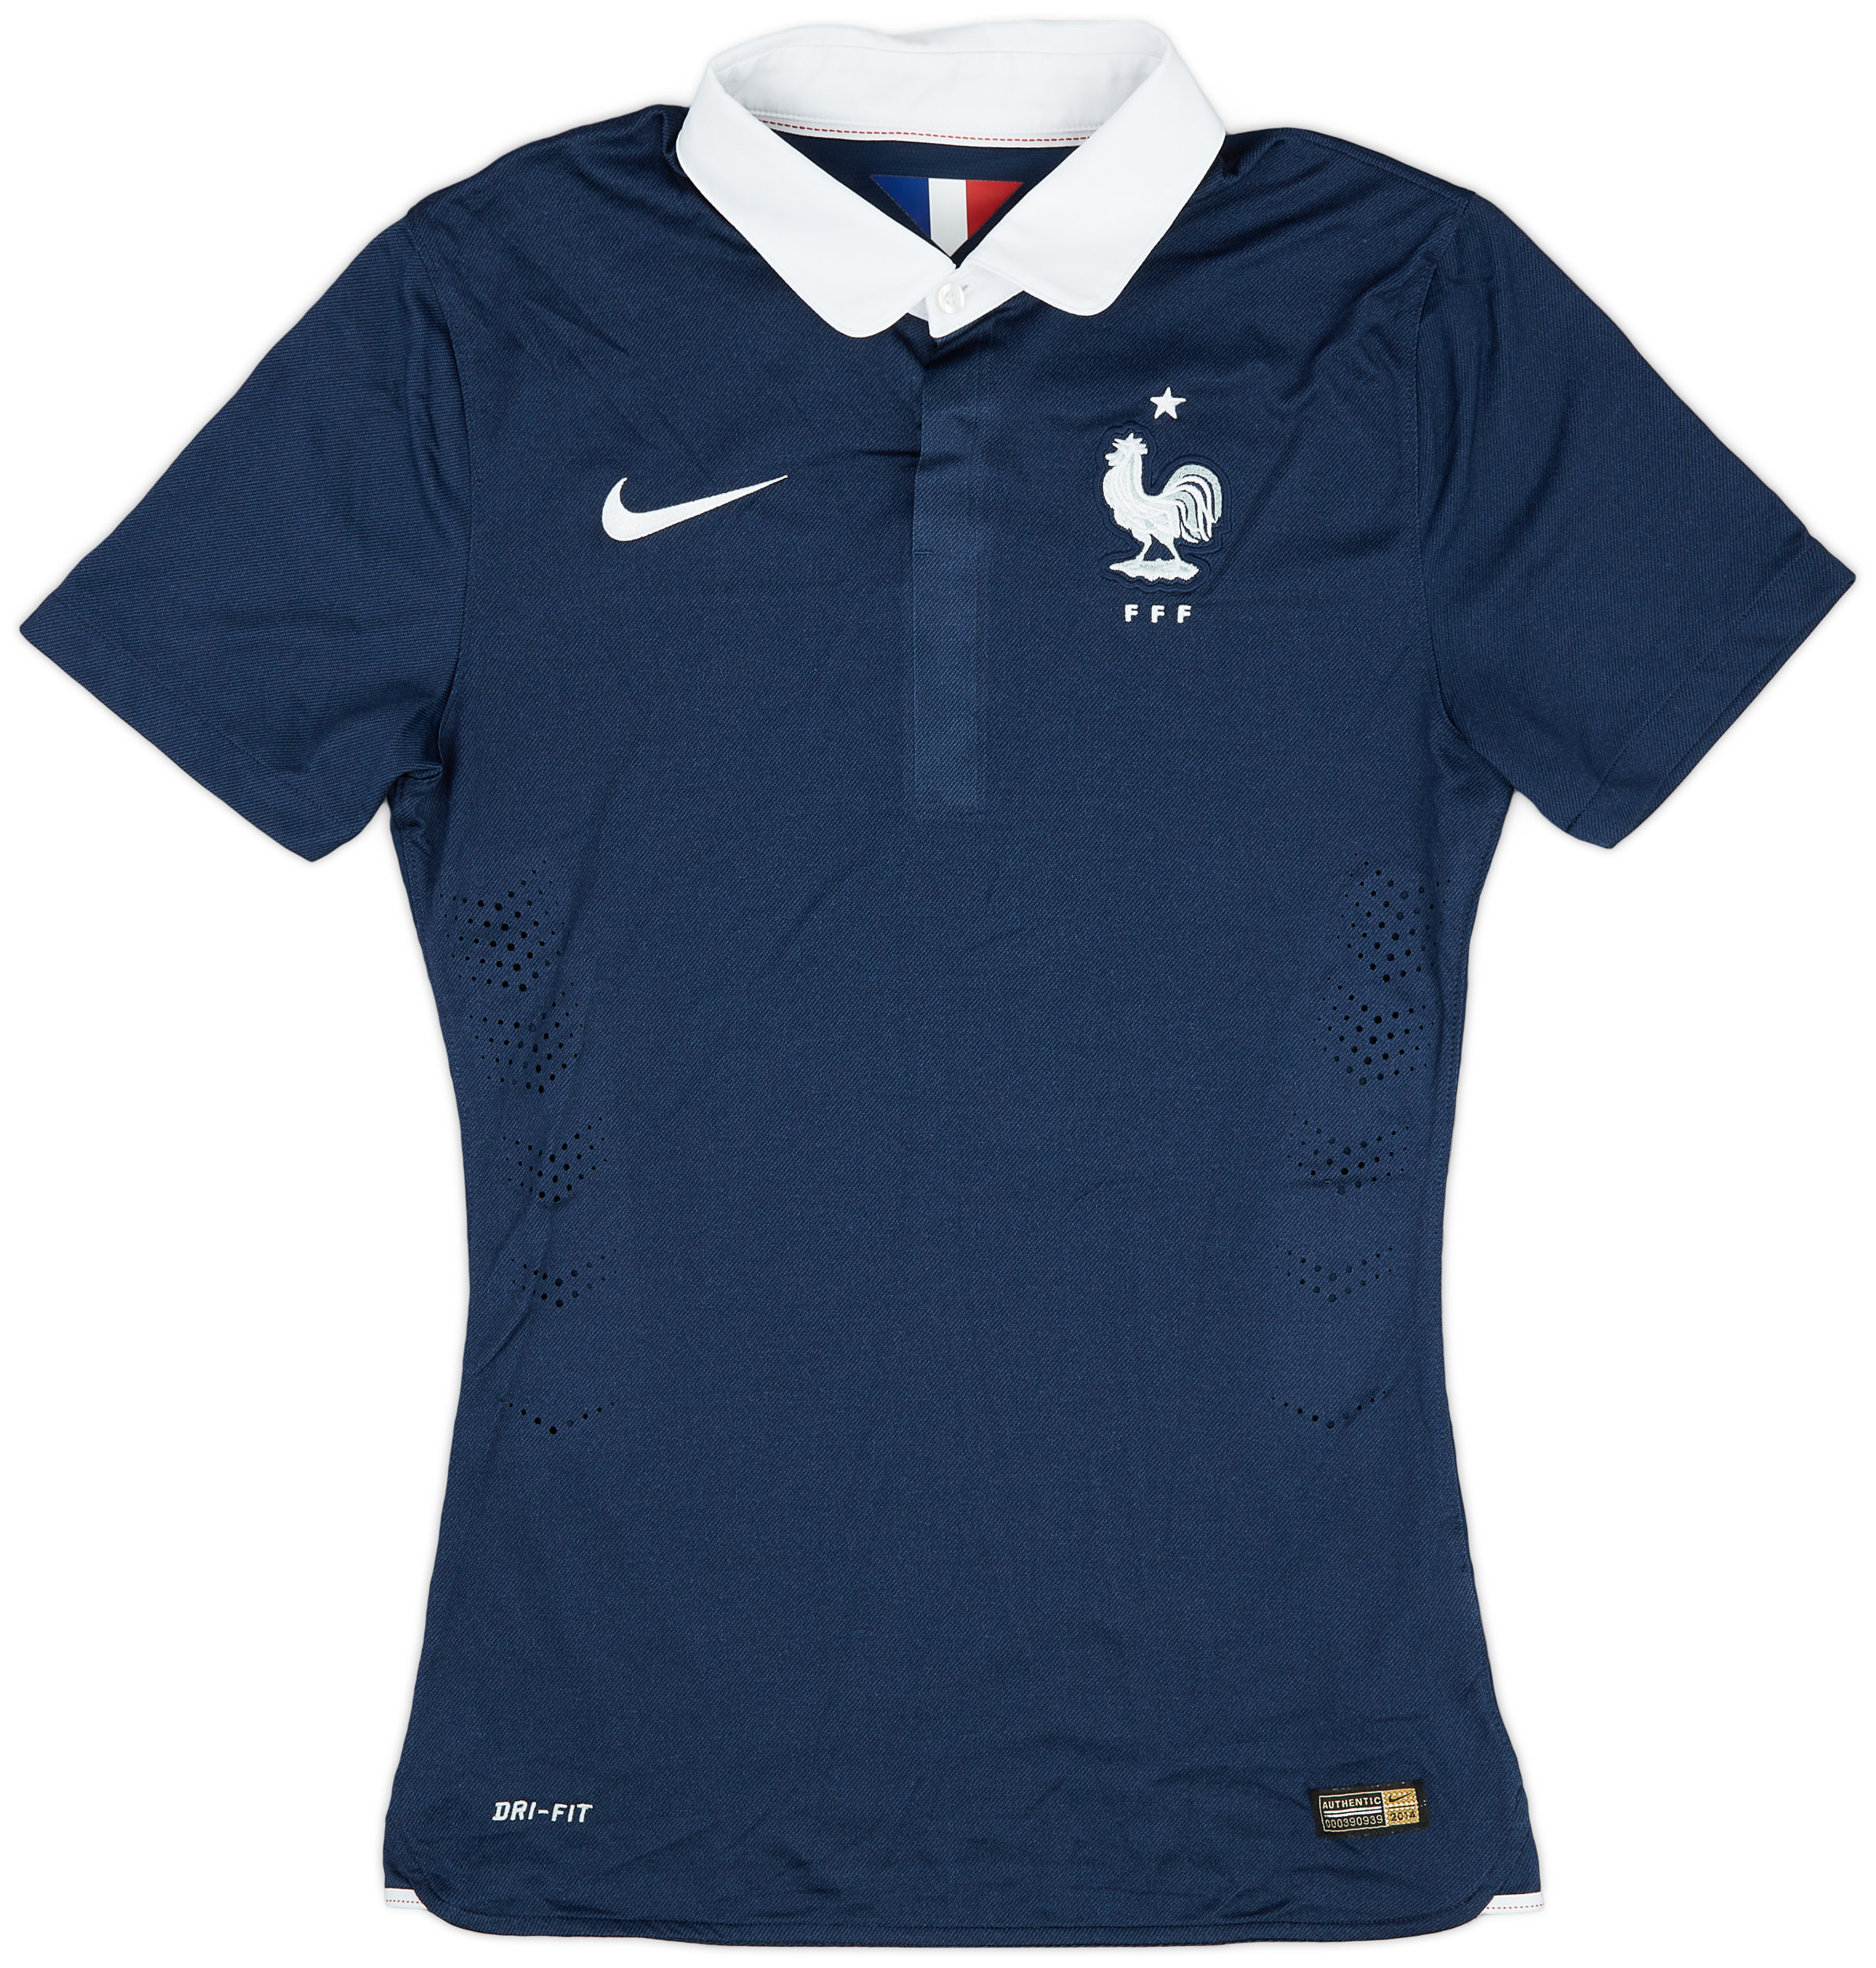 2014-15 France Authentic Home Shirt - 9/10 - ()